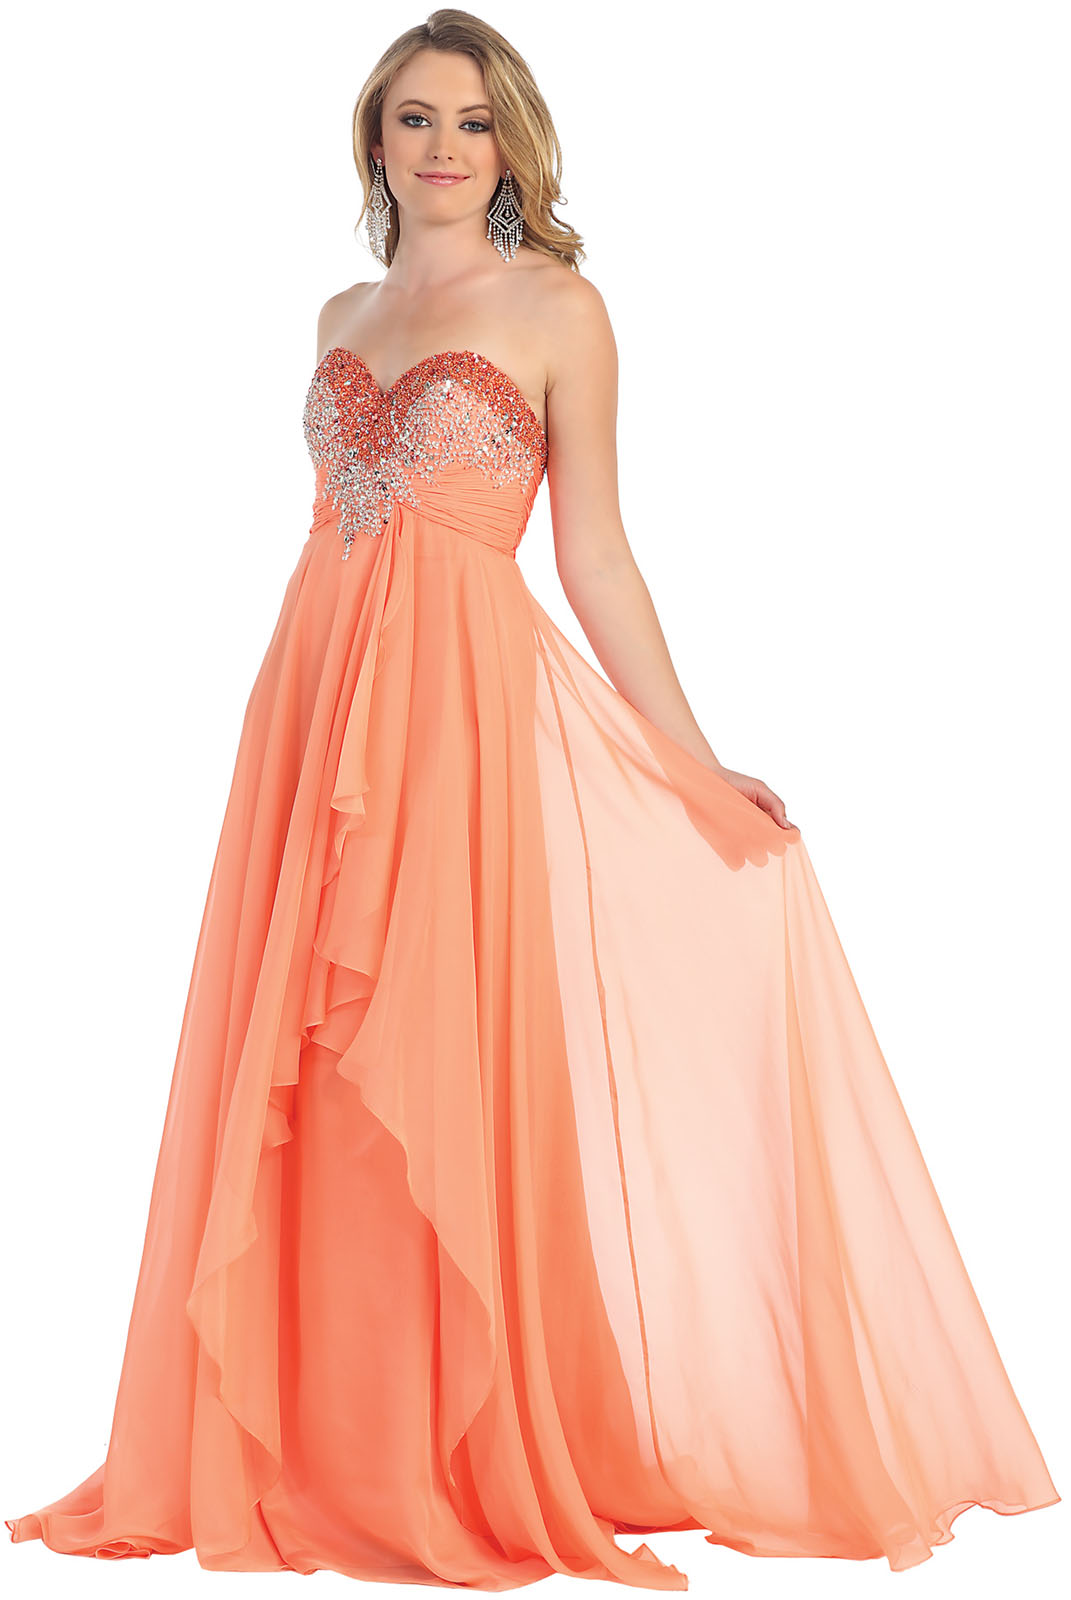 Designer SALE! STRAPLESS FLOOR SWEEPING EVENING PROM GOWN FLOWY SWEET ...